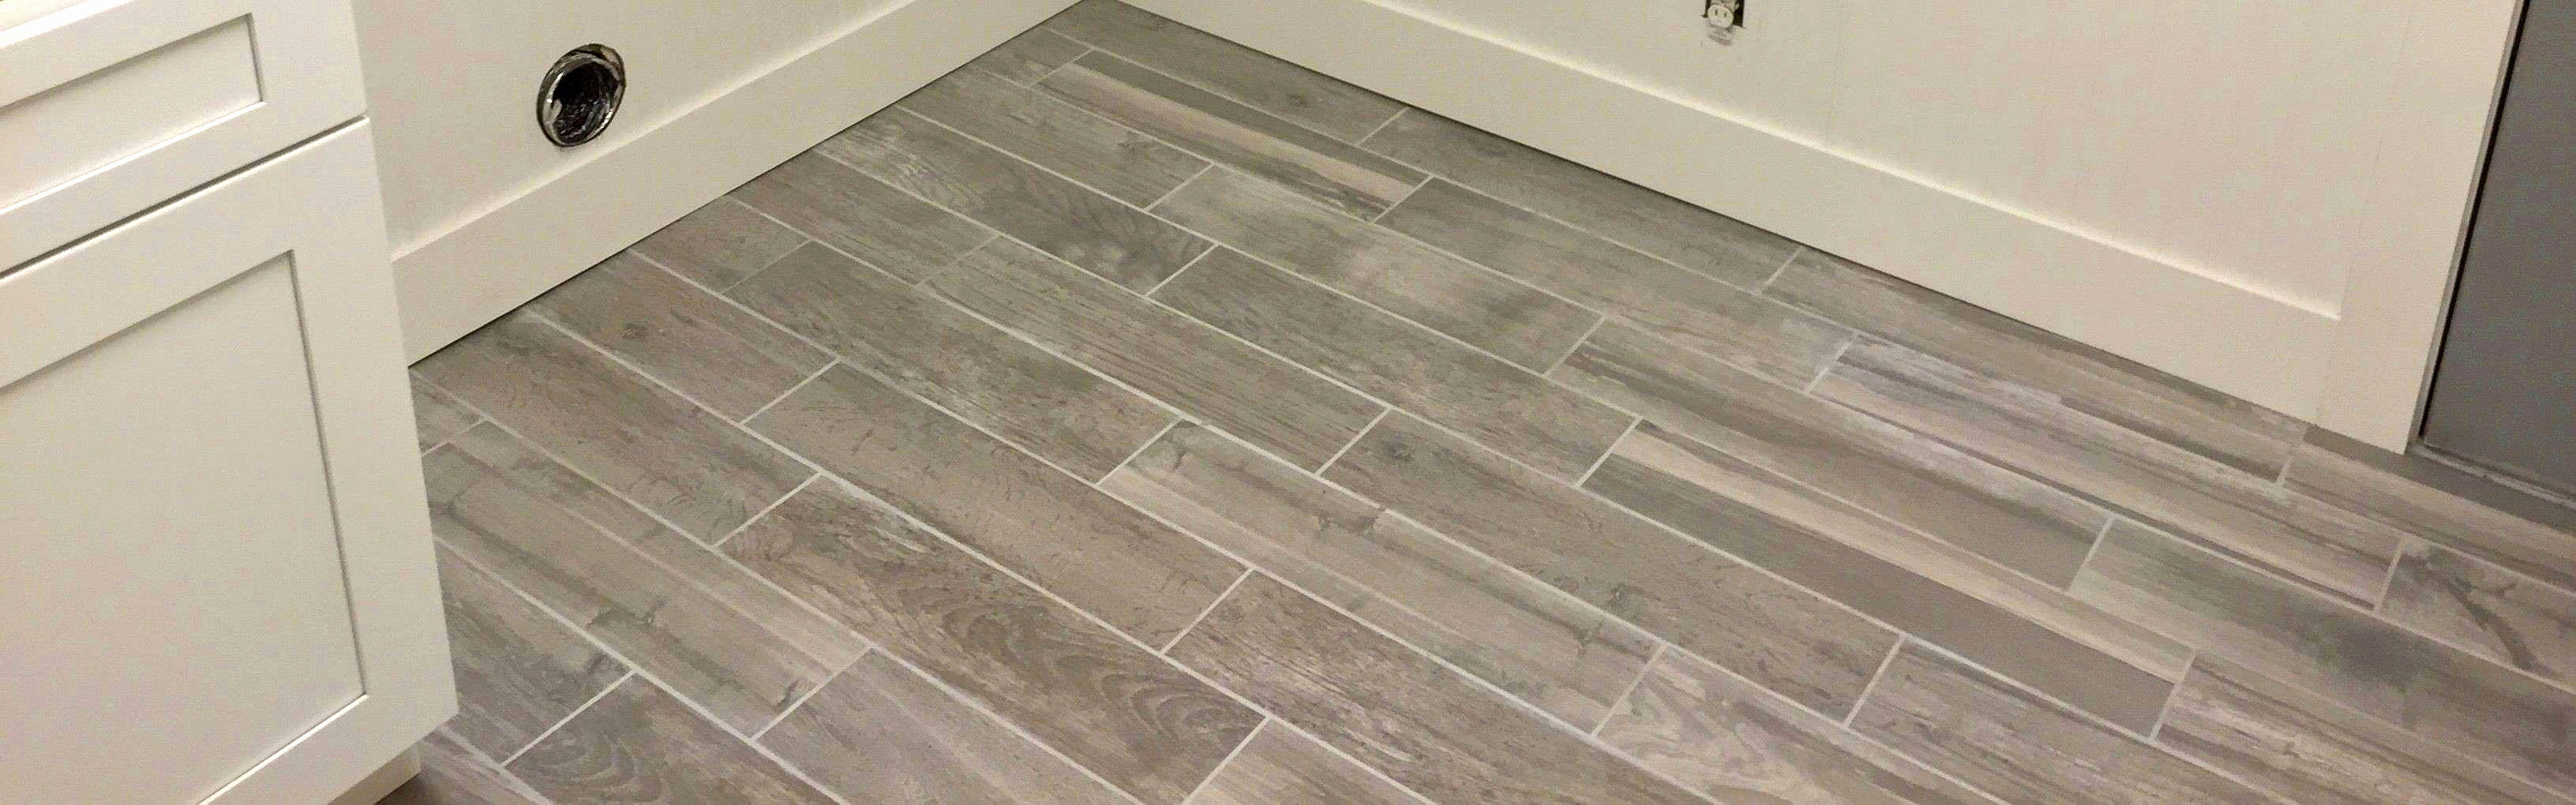 18 attractive Hardwood Flooring Company Reviews 2024 free download hardwood flooring company reviews of flooring contractors 14 best flooring for kitchen floor plan ideas throughout unique bathroom tiling ideas best h sink install bathroom i 0d exciting bea